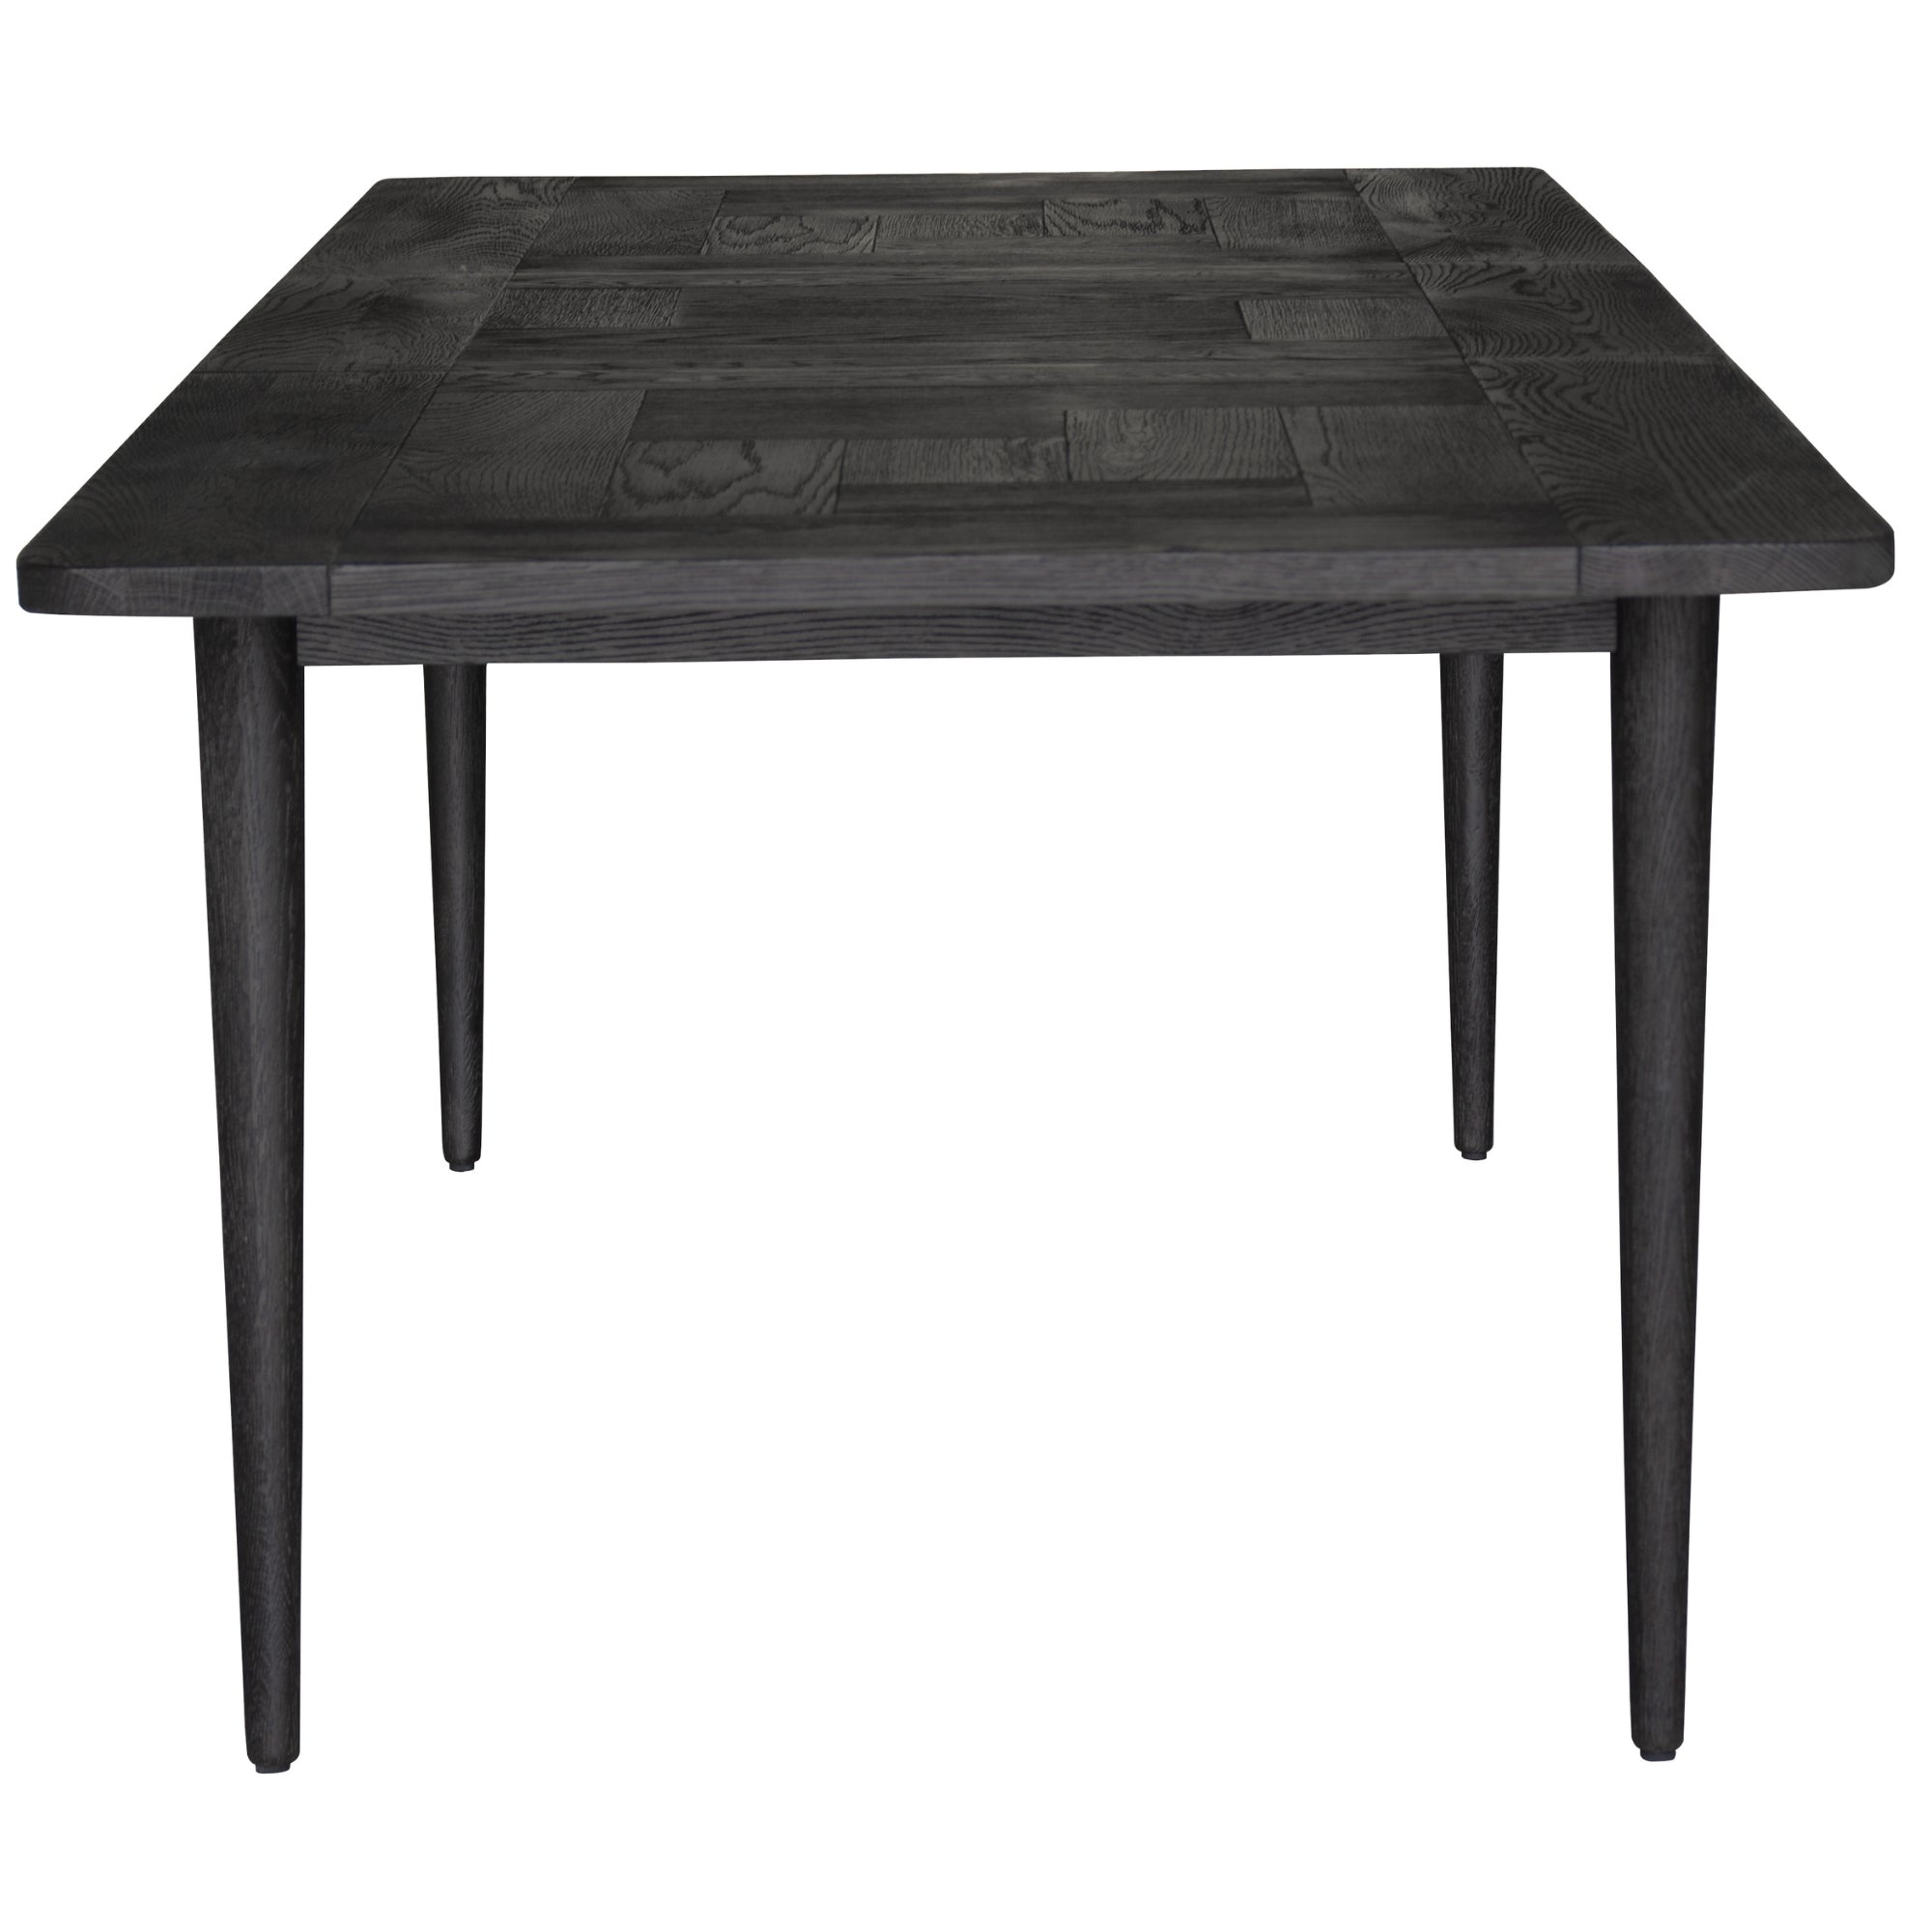 Claire Dining Table Extendable 170-230cm Solid Oak Wood Furniture - Black